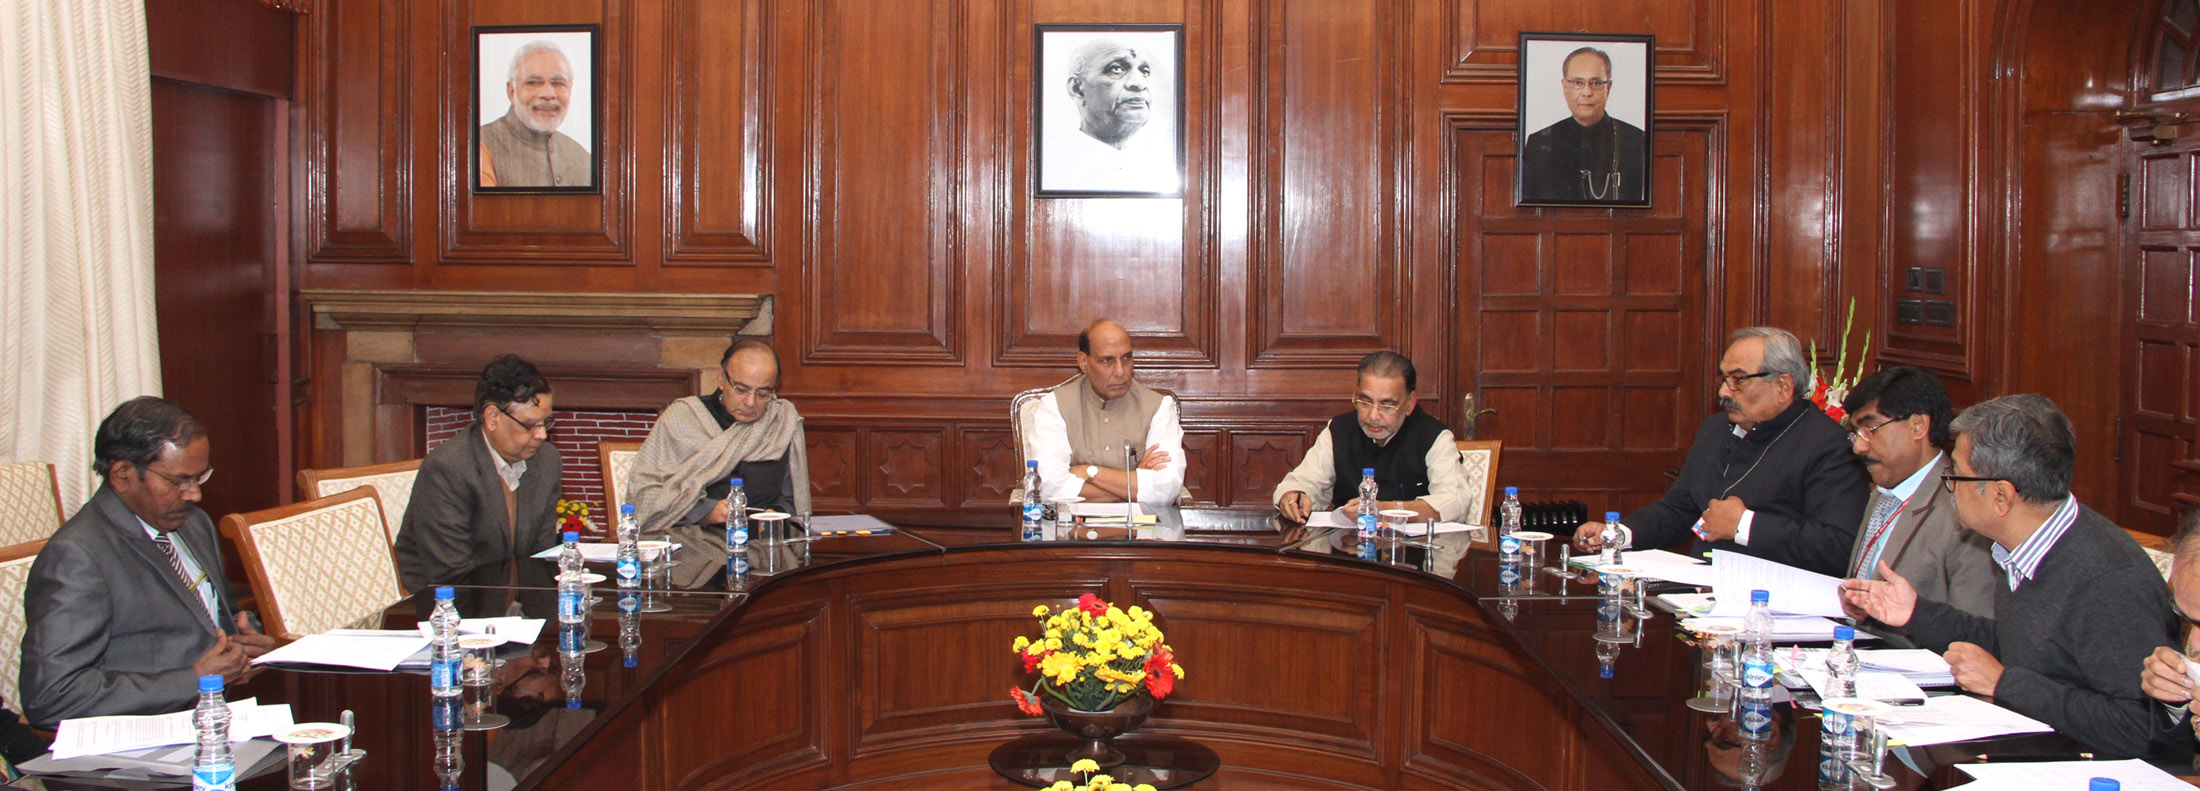 The Union Home Minister, Shri Rajnath Singh chairing a meeting of the High Level Committee (HLC), in New Delhi on January 06, 2016.  The Union Minister for Finance, Corporate Affairs and Information & Broadcasting, Shri Arun Jaitley, the Union Minister for Agriculture and Farmers Welfare, Shri Radha Mohan Singh, the Vice-Chairman NITI Aayog, Shri Arvind Panagariya, the Union Home Secretary, Shri Rajiv Mehrishi and senior officers of the Ministries of Home, Finance and Agriculture are also seen.